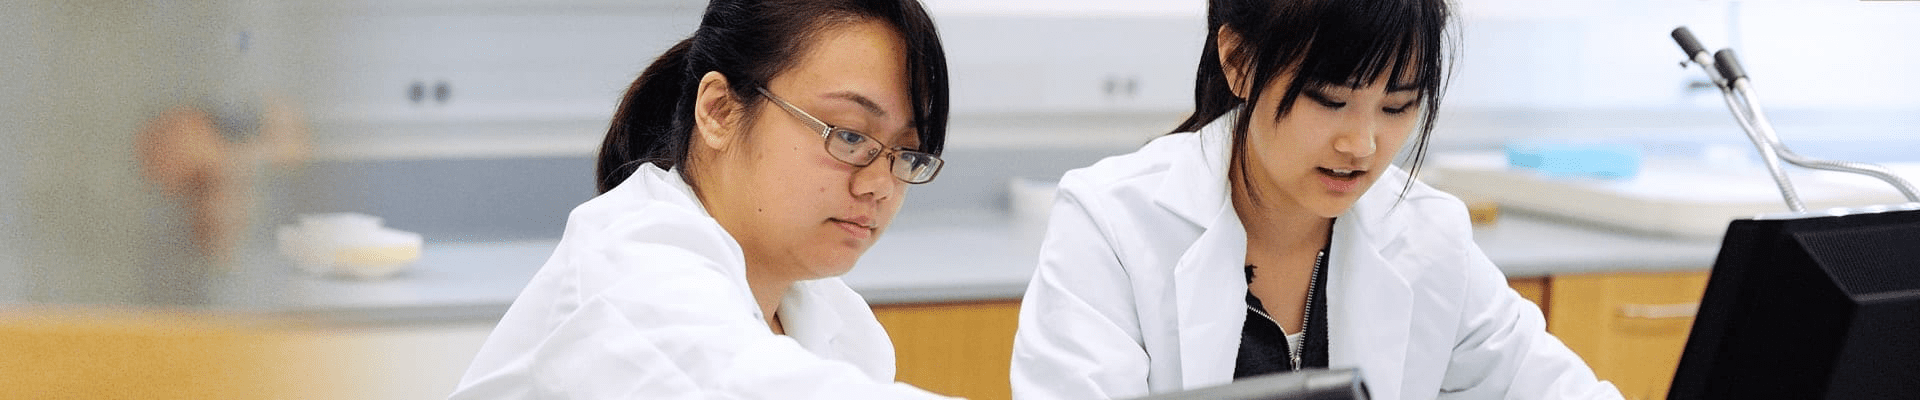 two female students wearing white lab coats working in the lab